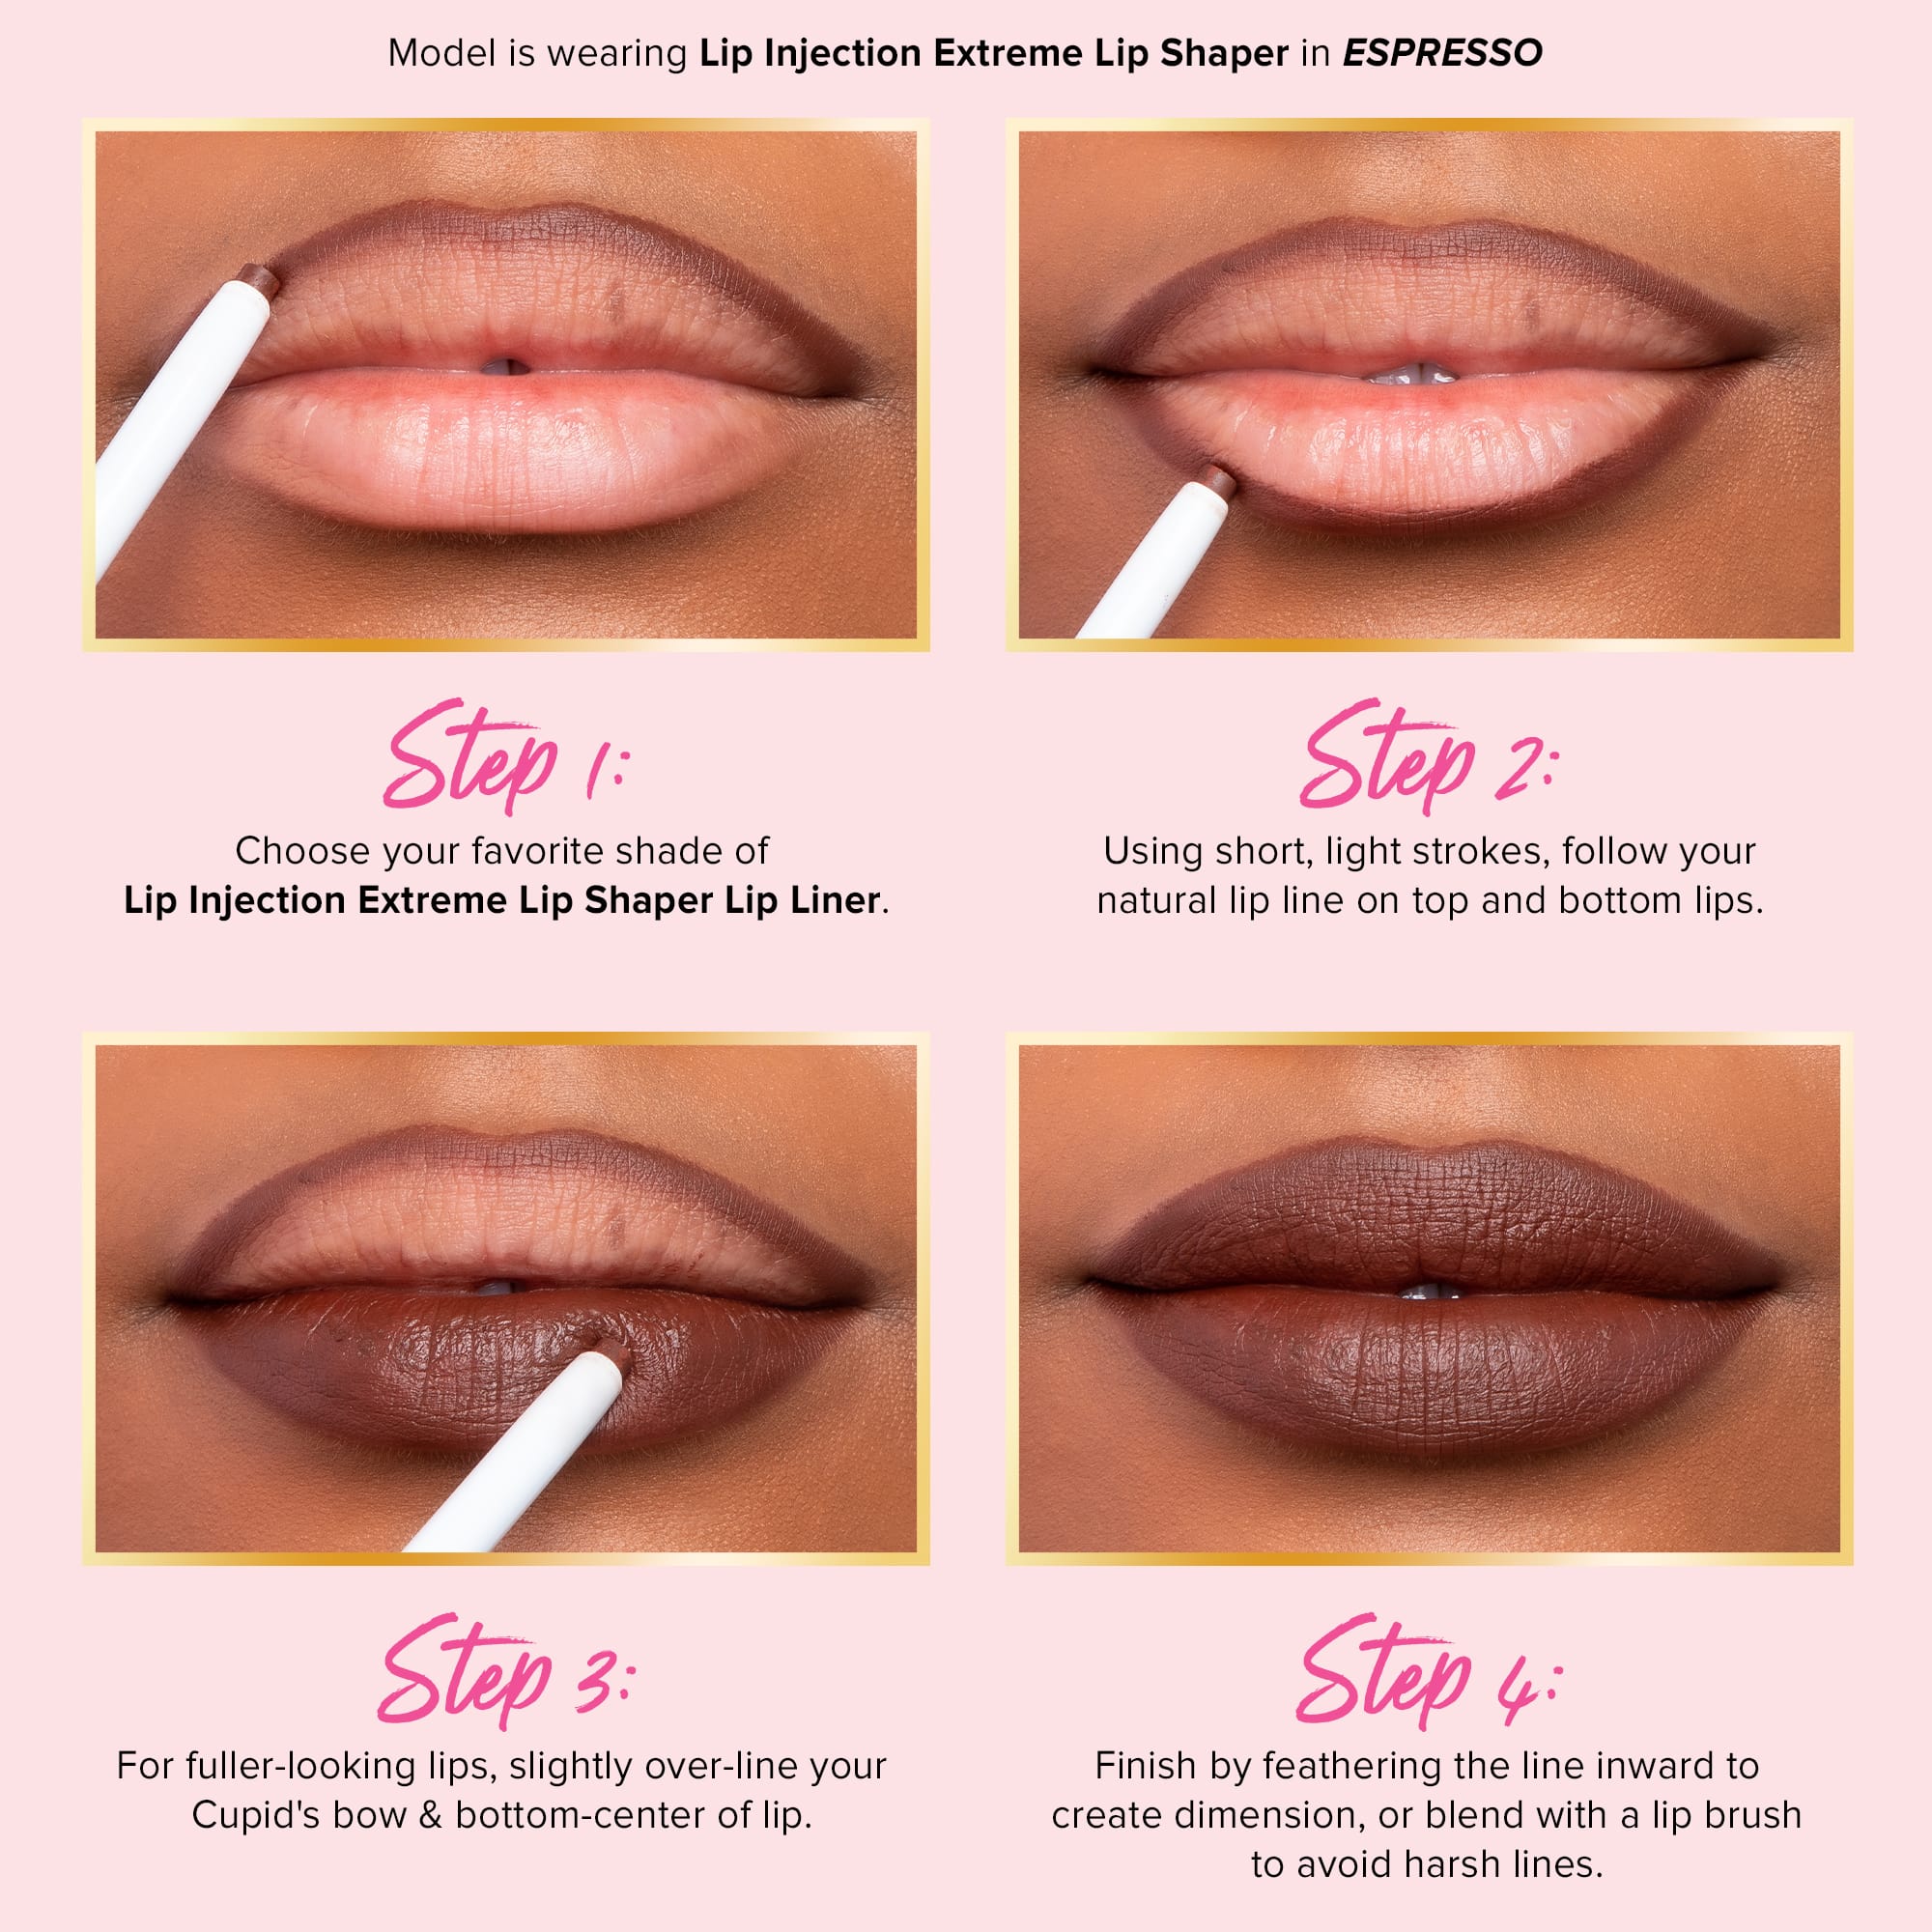 https://m.toofaced.com/media/export/cms/collection_pages/lip-injection/how-to-apply-lip-shaper.jpg